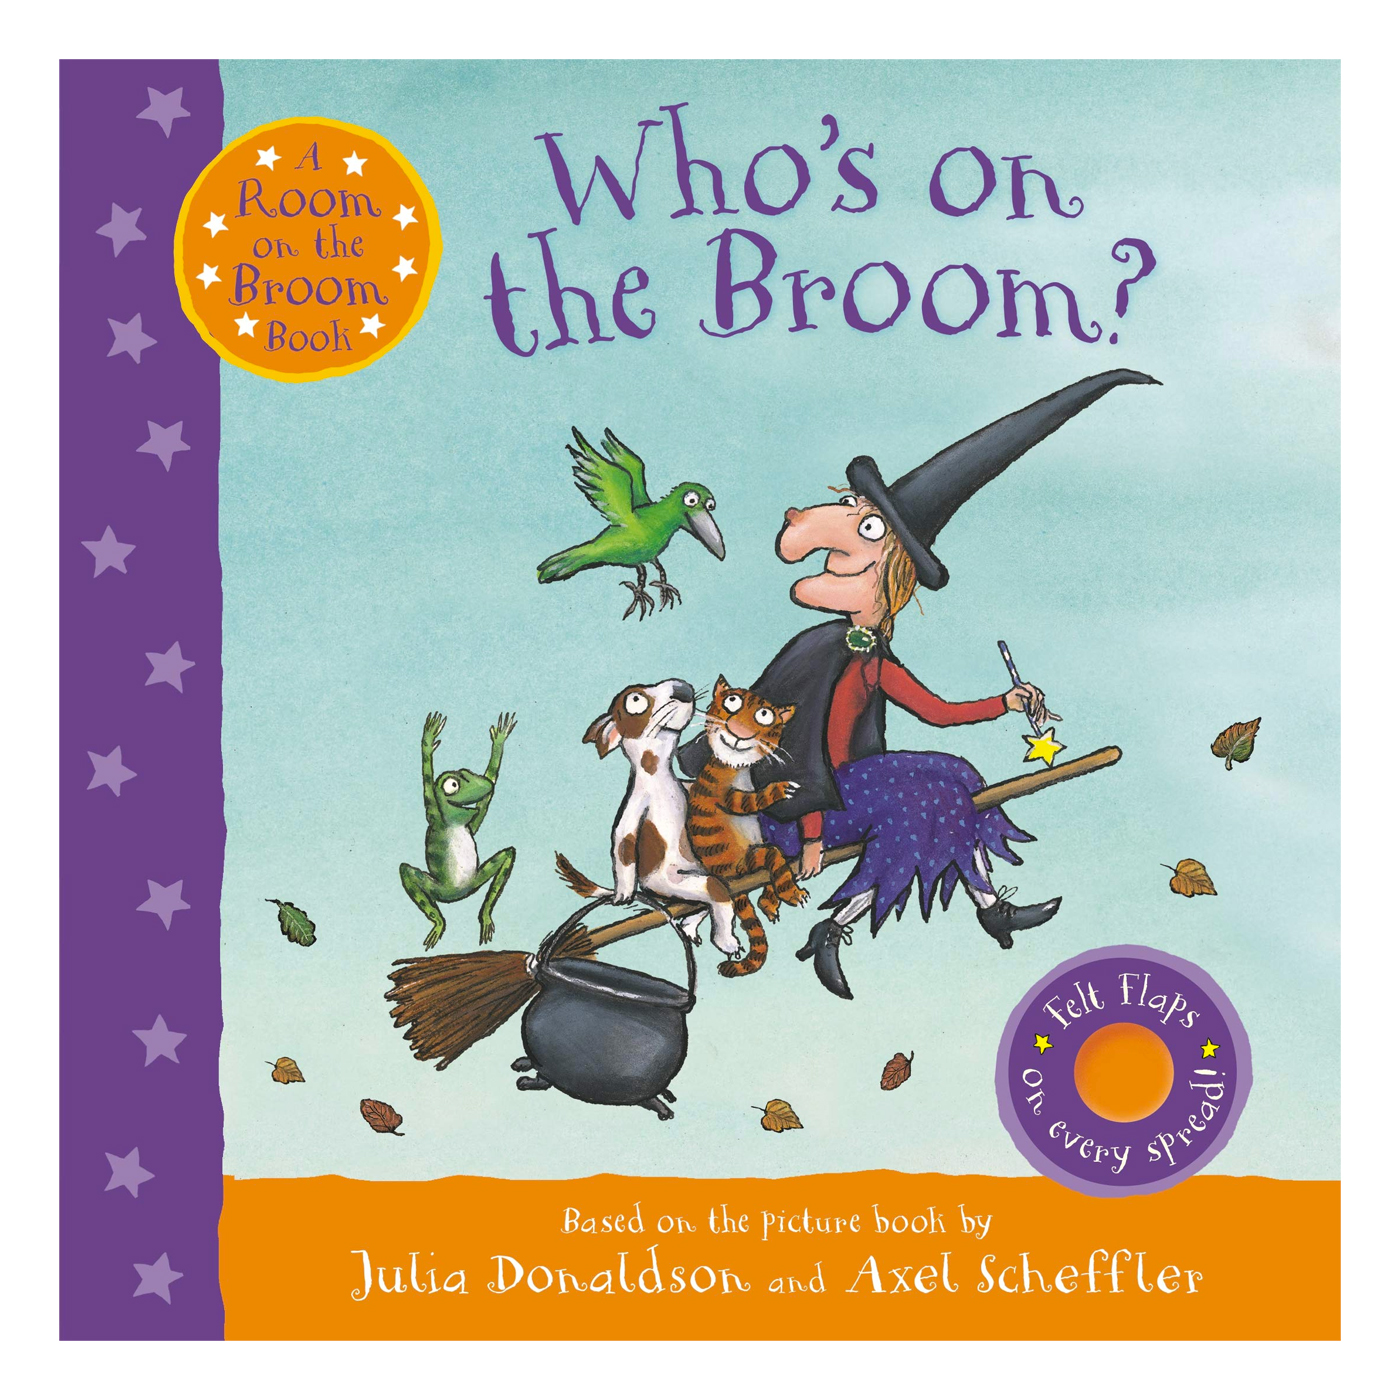  Who's on the Broom? : A Room on the Broom Book